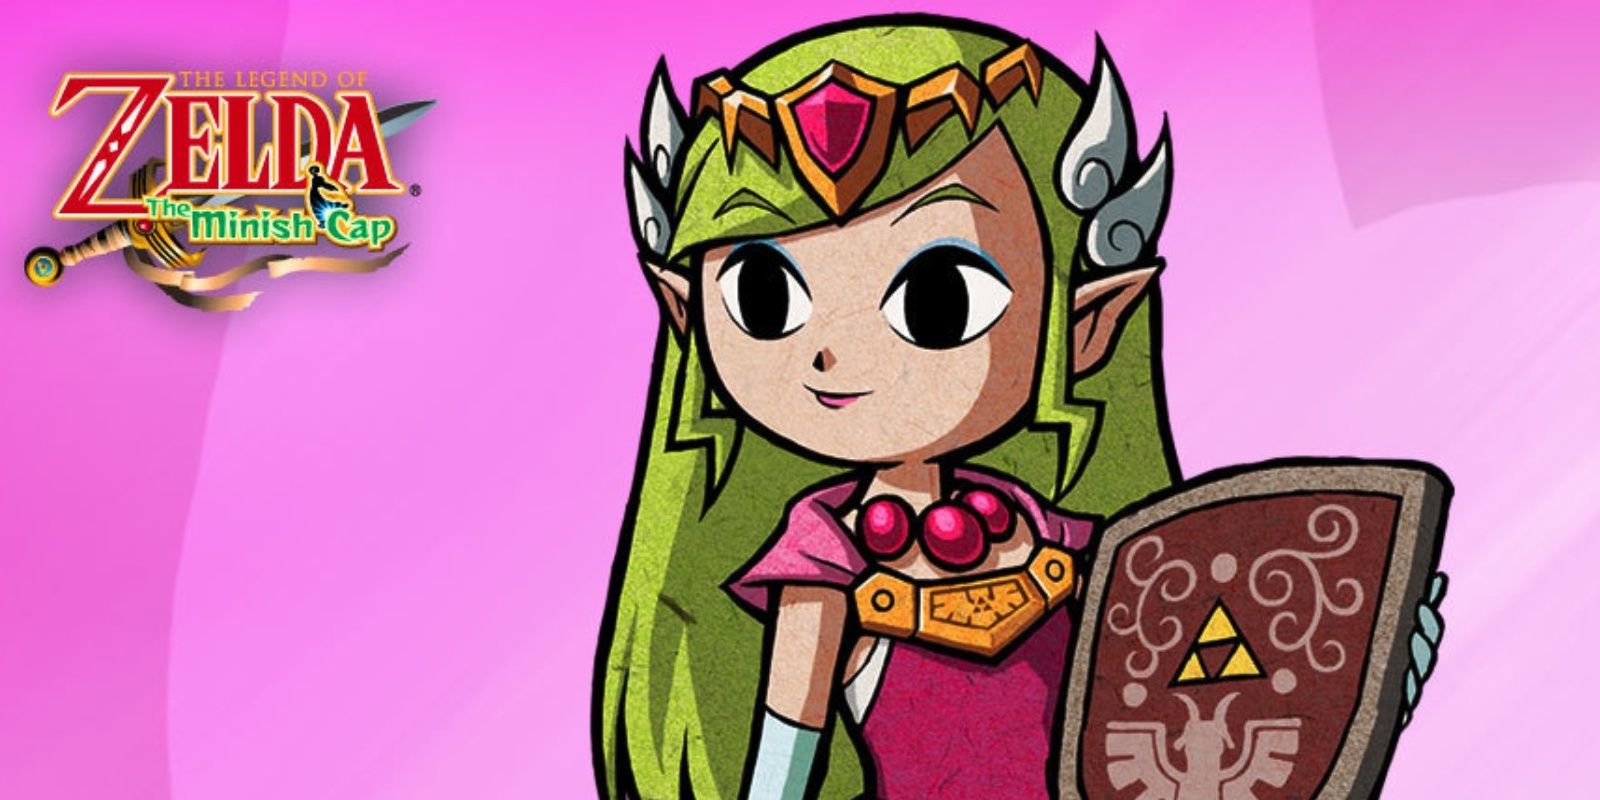 Princess Zelda as she appears in The Minish Cap with Game Logo and Title